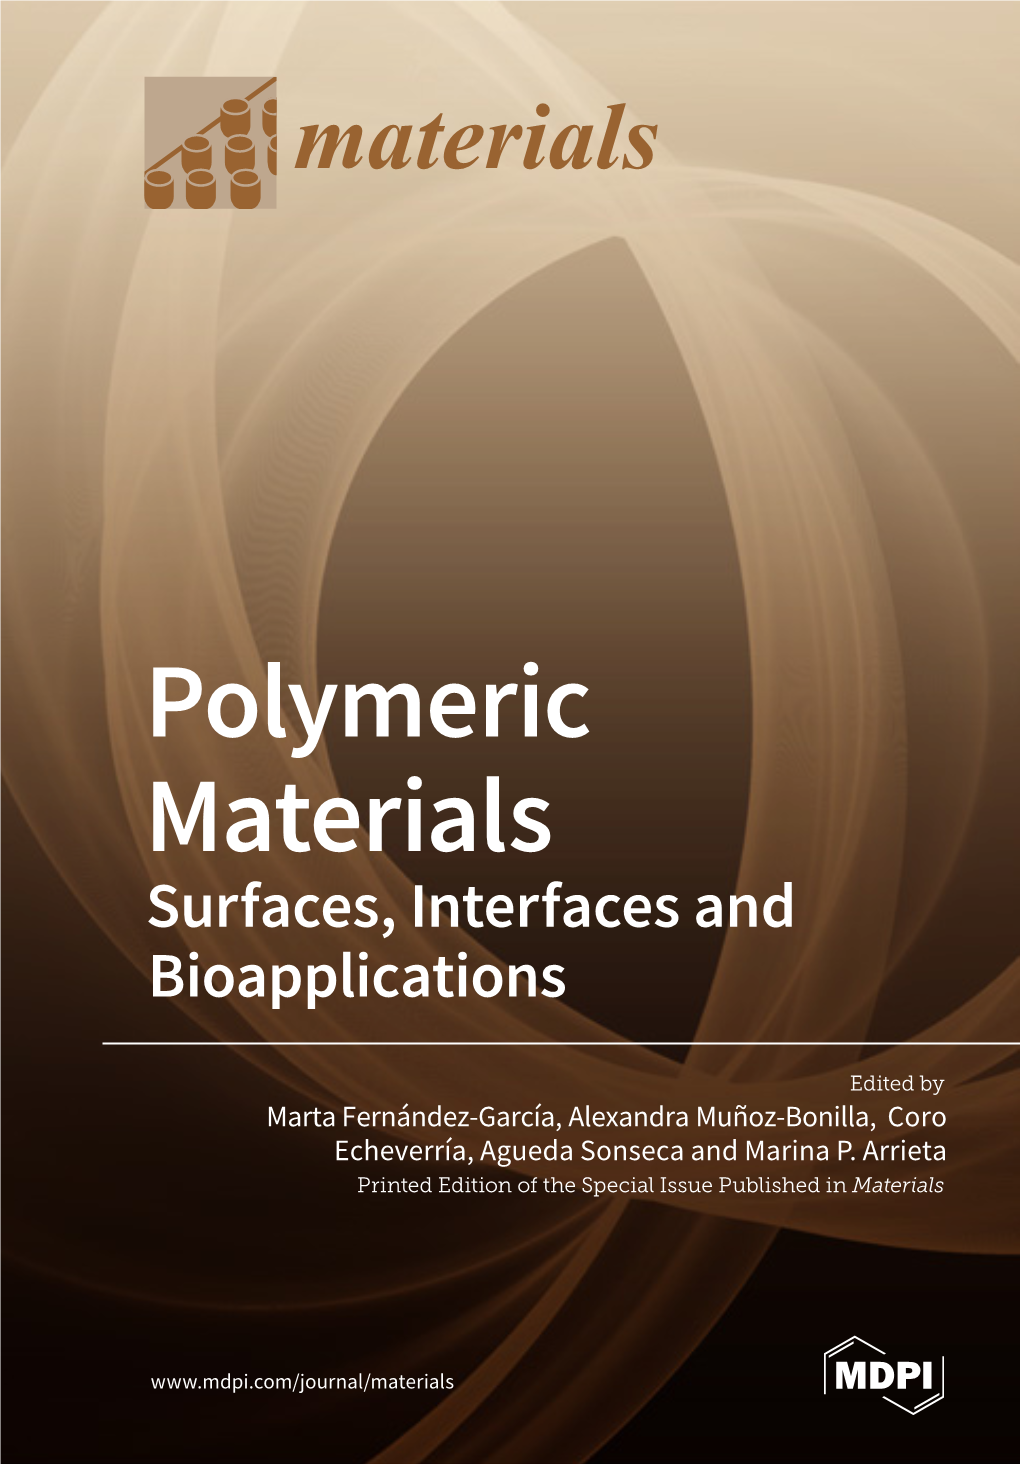 Polymeric Materials Surfaces, Interfaces and Bioapplications